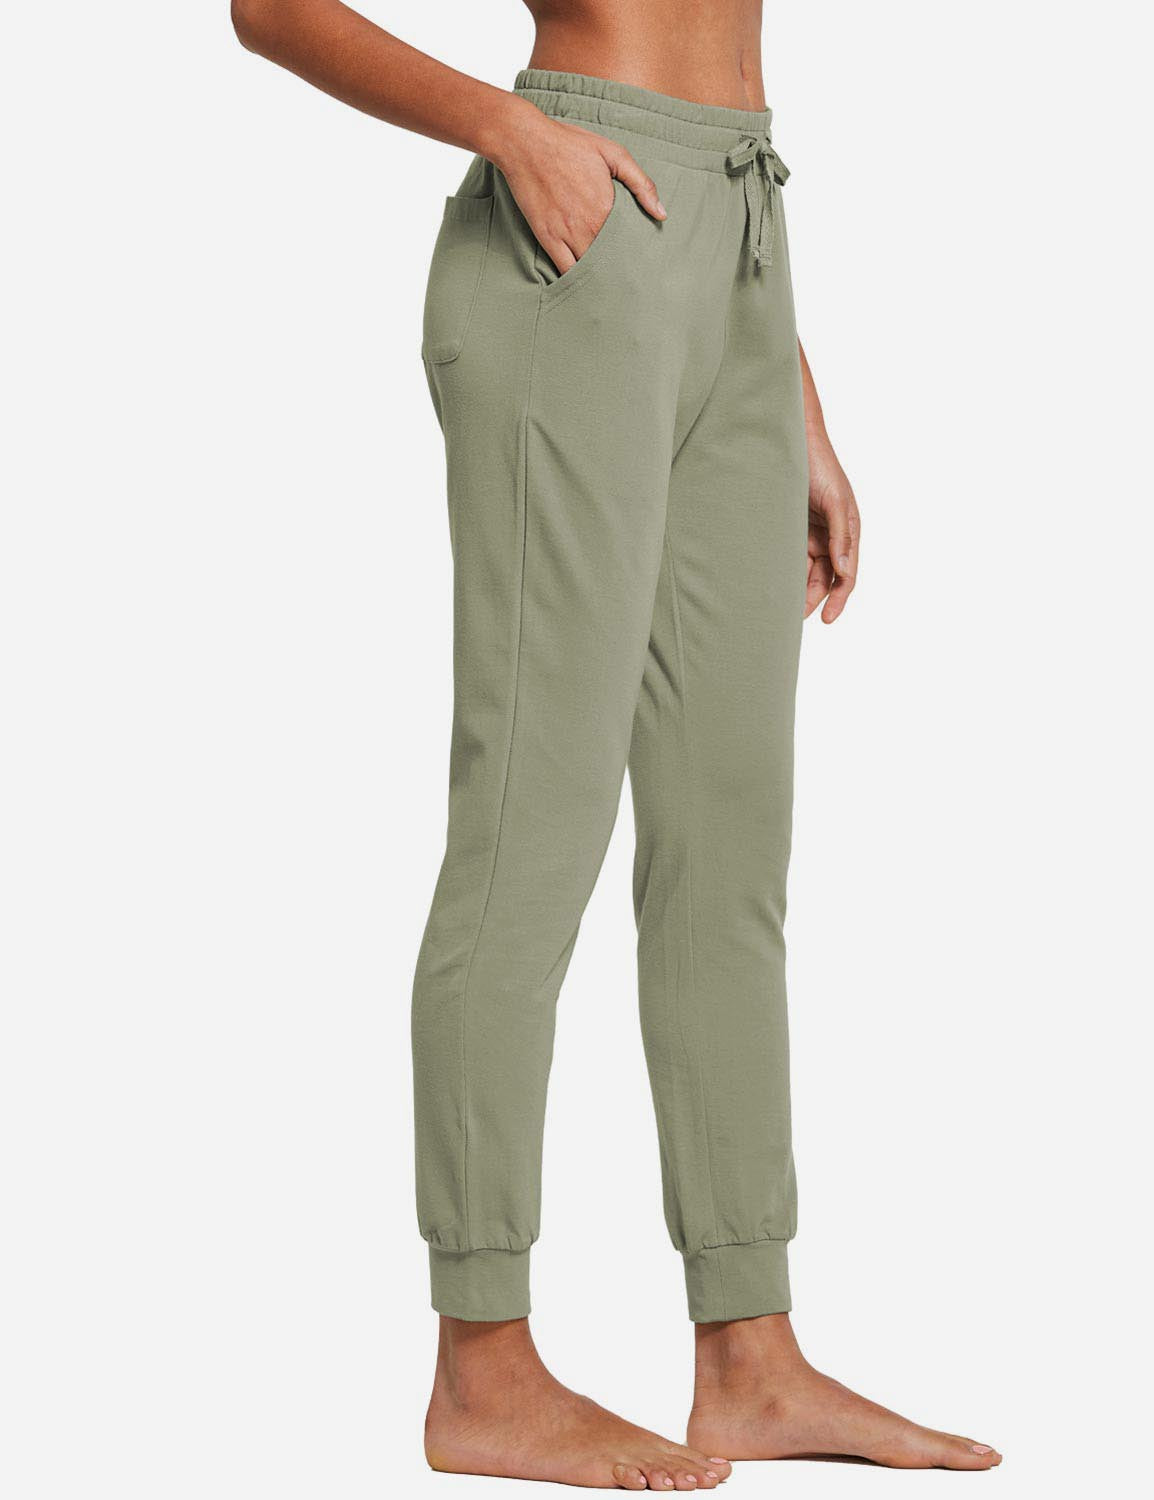 Baleaf Women's Cotton Comfy Pocketed & Tapered Weekend Joggers abh103 Spray Green Side